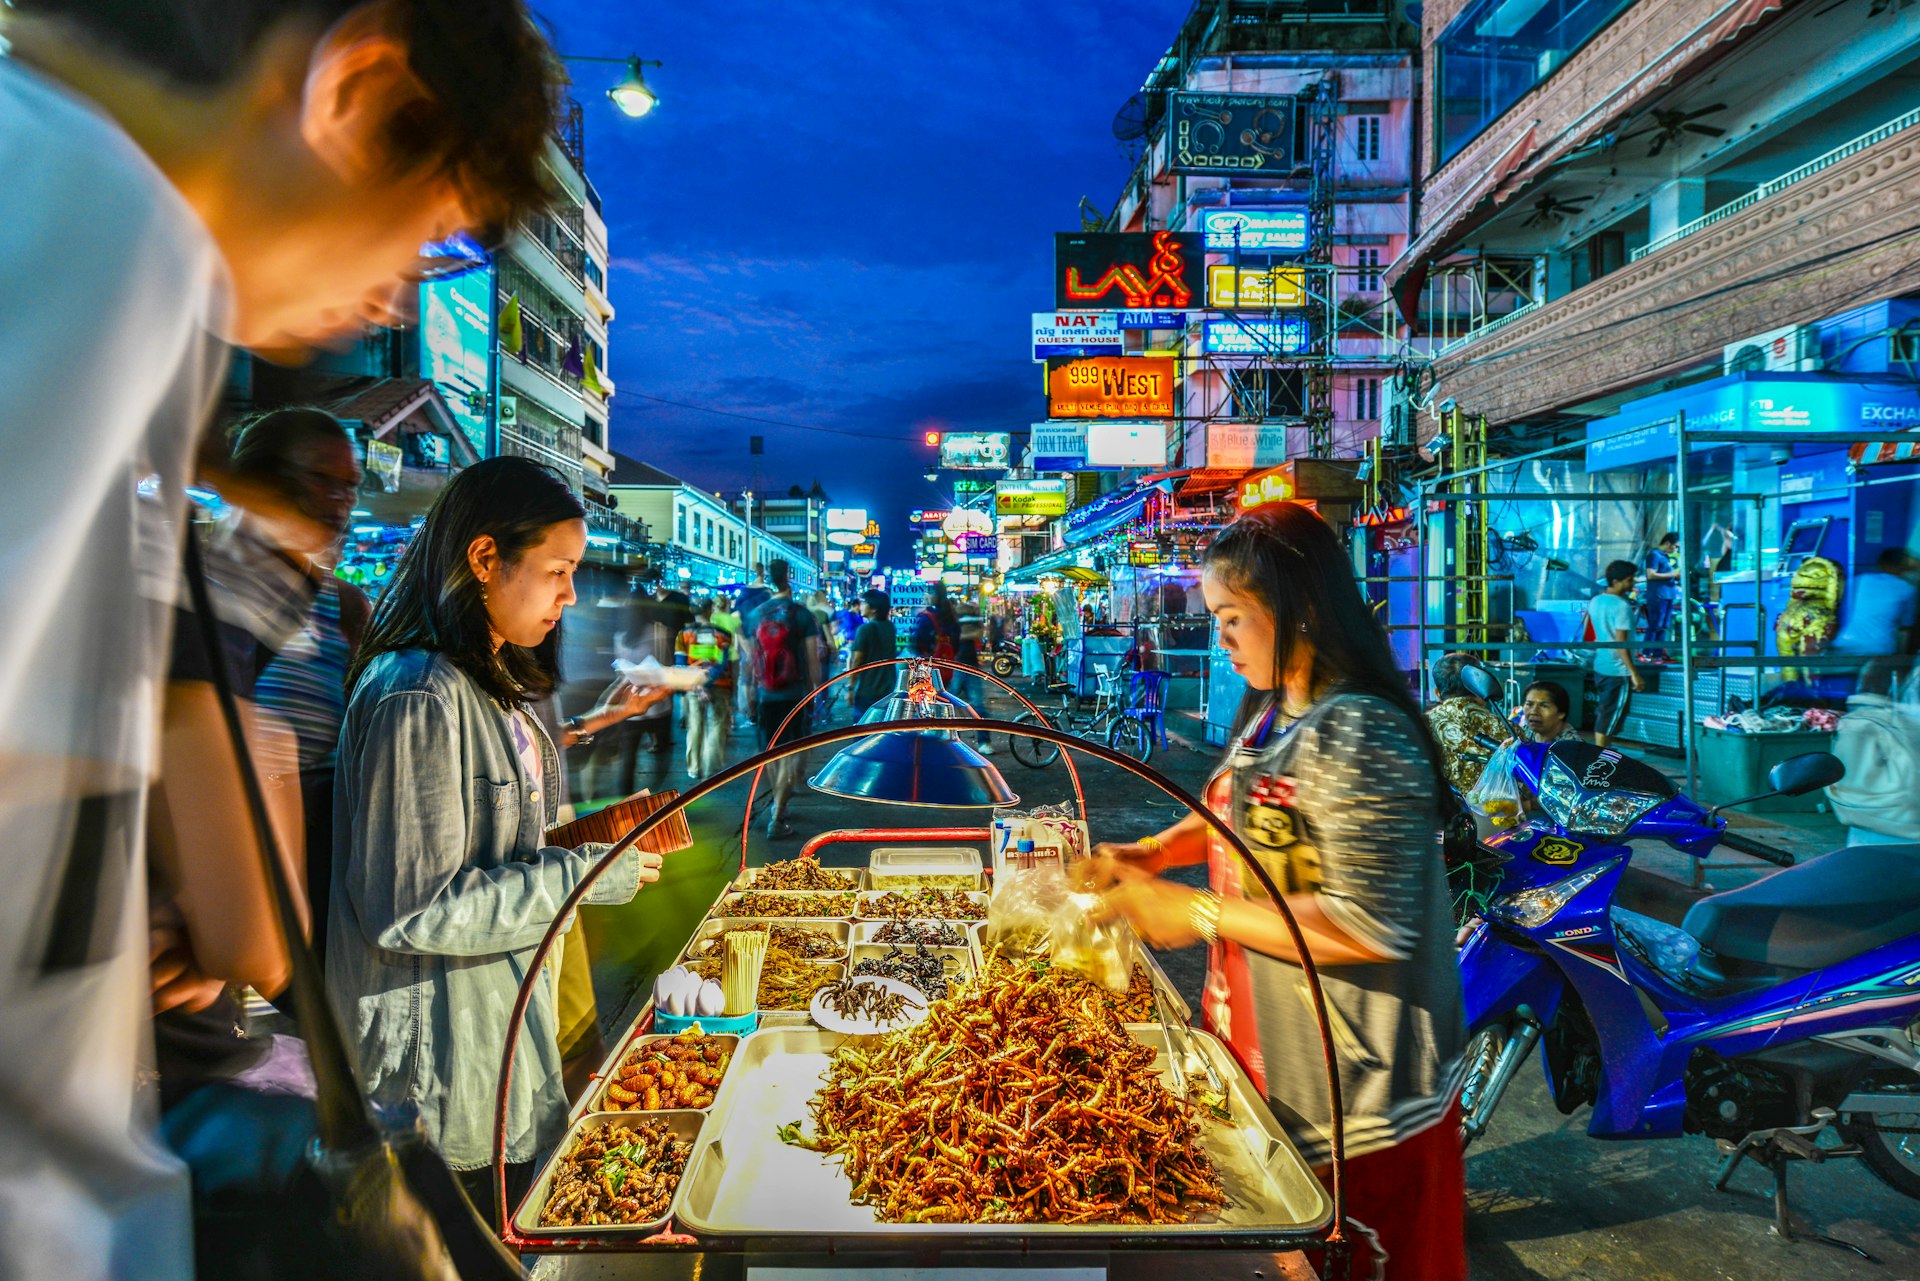 A street vendor sells fried cockroaches and other insects to tourists on Khao San Road in Bangkok, Thailand